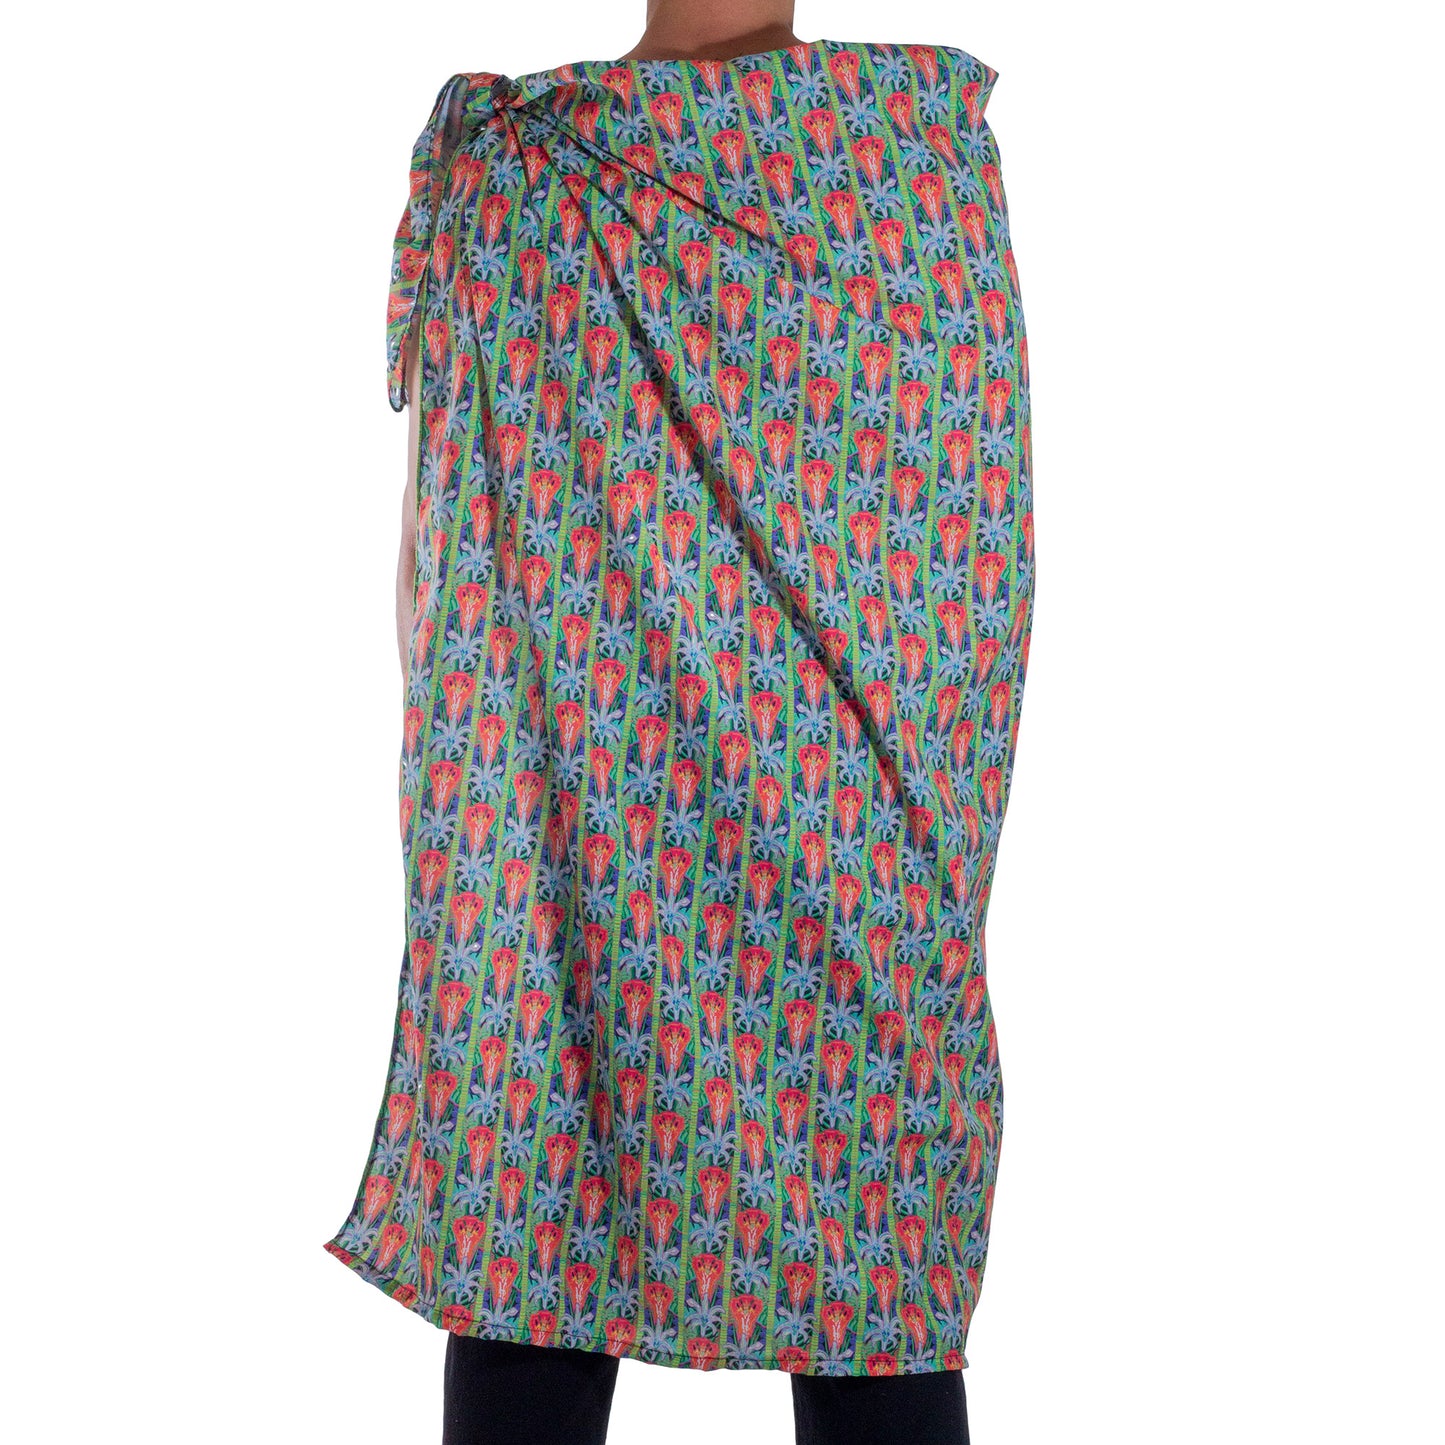 TM0001 Poncho style Tematl Loltun printed with flower figures on sublimated fabric skinit